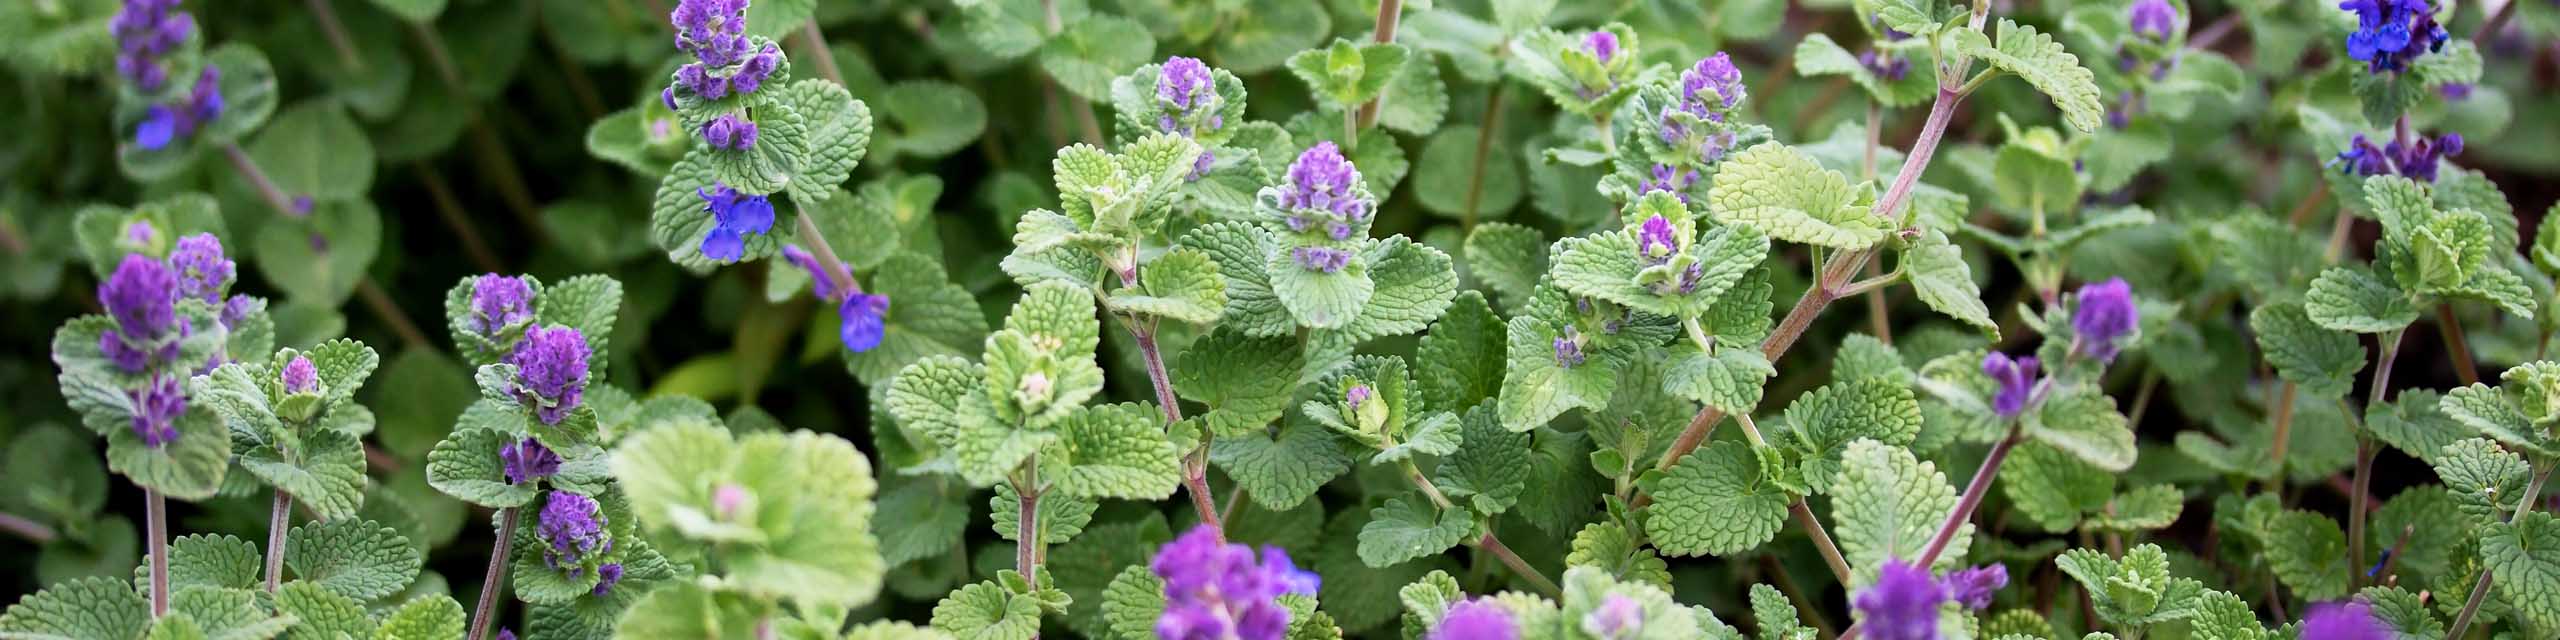 Nepeta racemosa, or raceme catnip, with purple flowers growing in a herb garden.